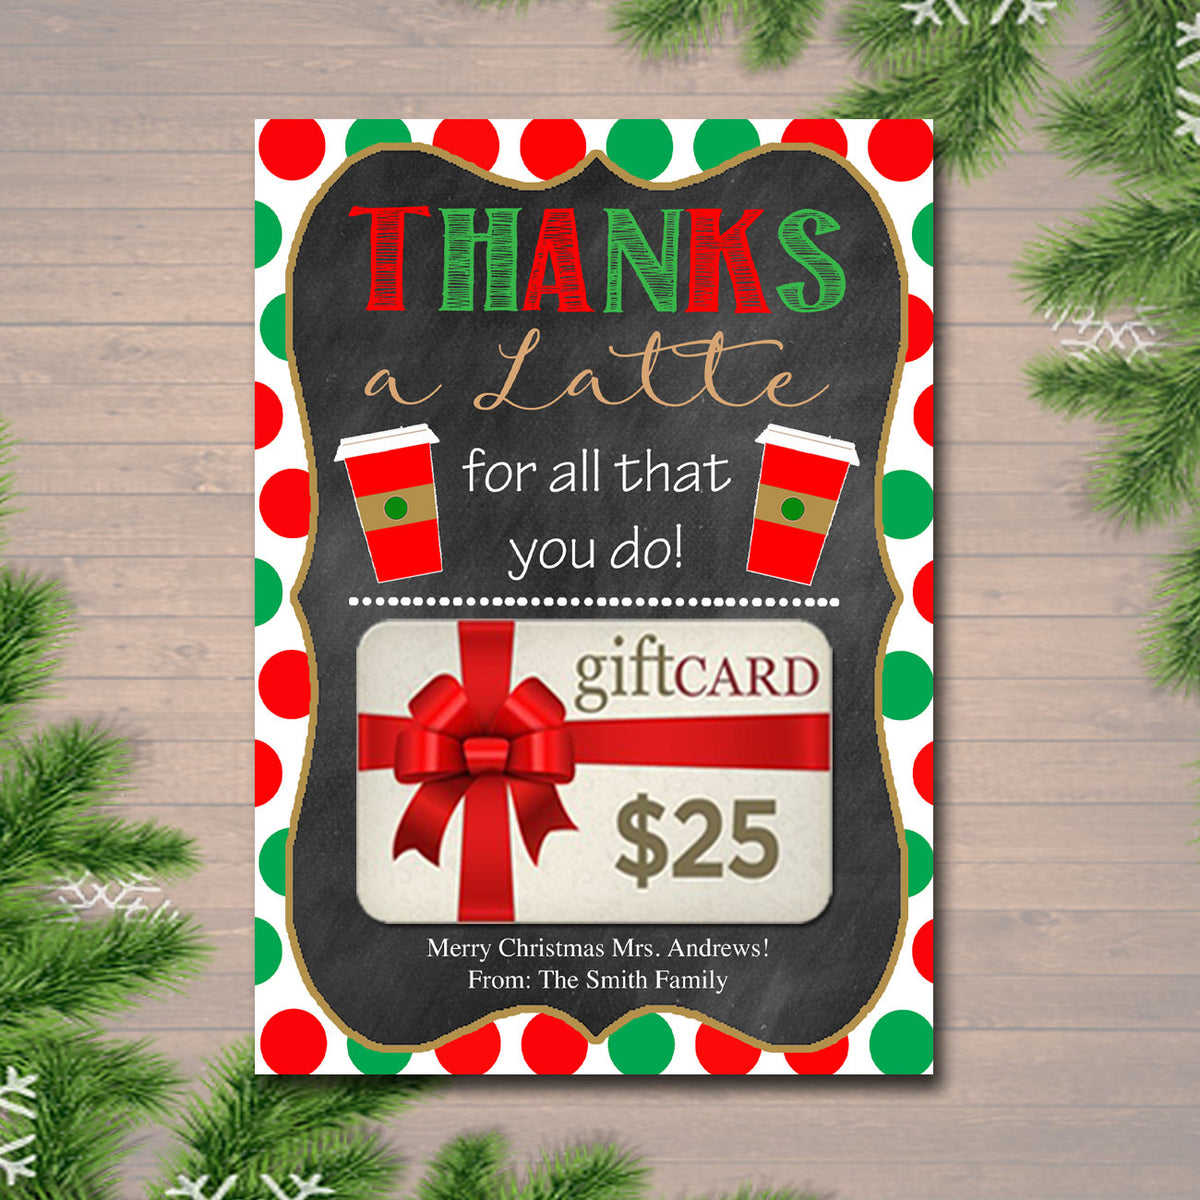 thanks-a-latte-holiday-gift-card-holder-tidylady-printables